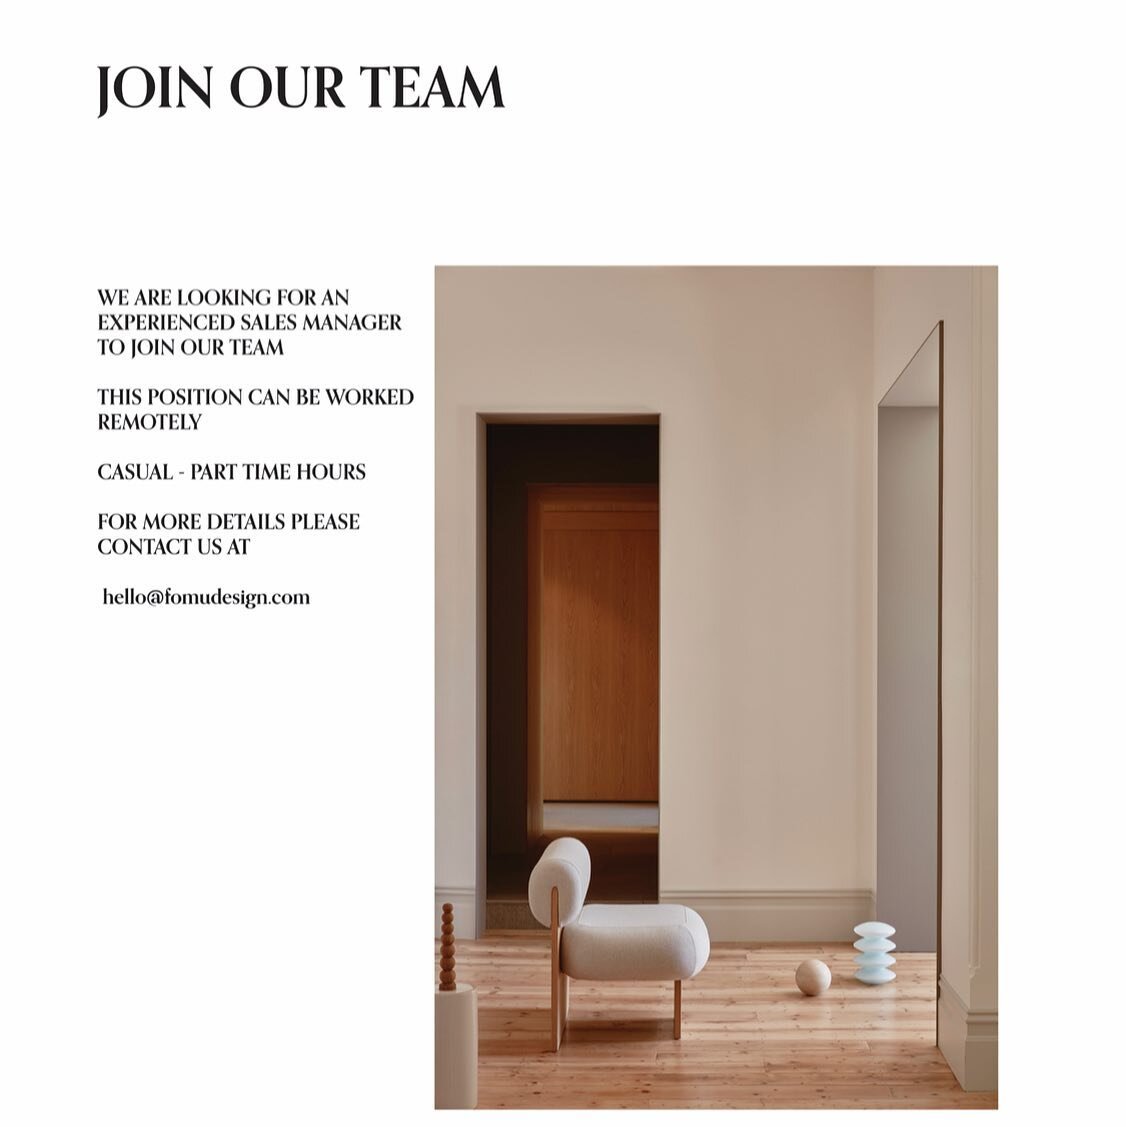 JOIN OUR TEAM

We are looking for an experienced Sales Manager to work casual/ part-time hours 

This position can be worked remotely

If this sounds like you please send us an email at hello@fomudesign.com for more information